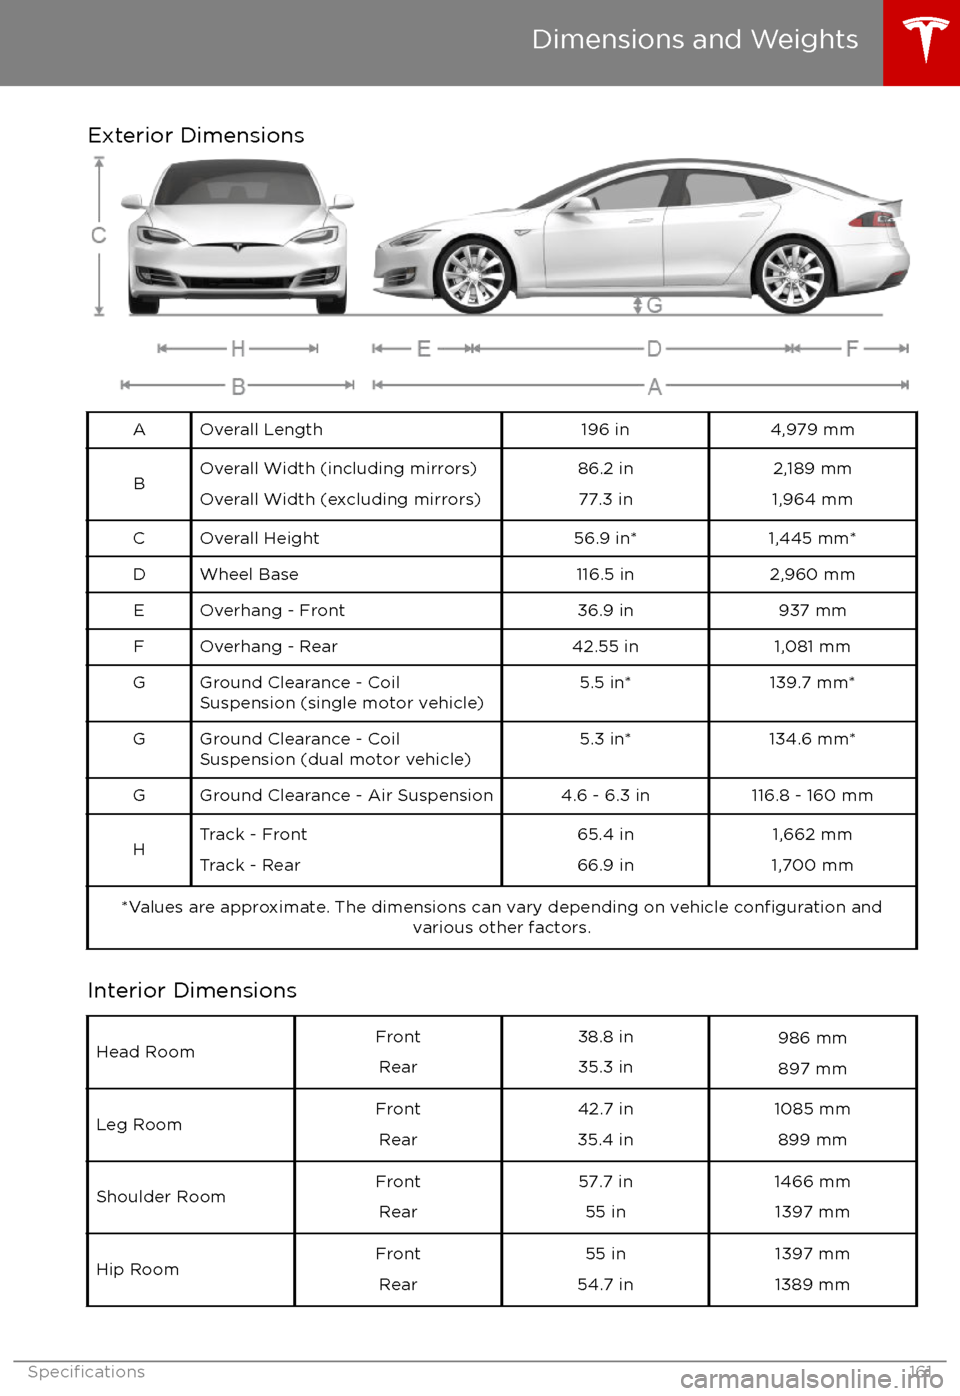 TESLA MODEL S 2017  Owners Manual Exterior DimensionsAOverall Length196 in4,979 mmBOverall Width (including mirrors)Overall Width (excluding mirrors)86.2 in 77.3 in2,189 mm
1,964 mmCOverall Height56.9 in*1,445 mm*DWheel Base116.5 in2,